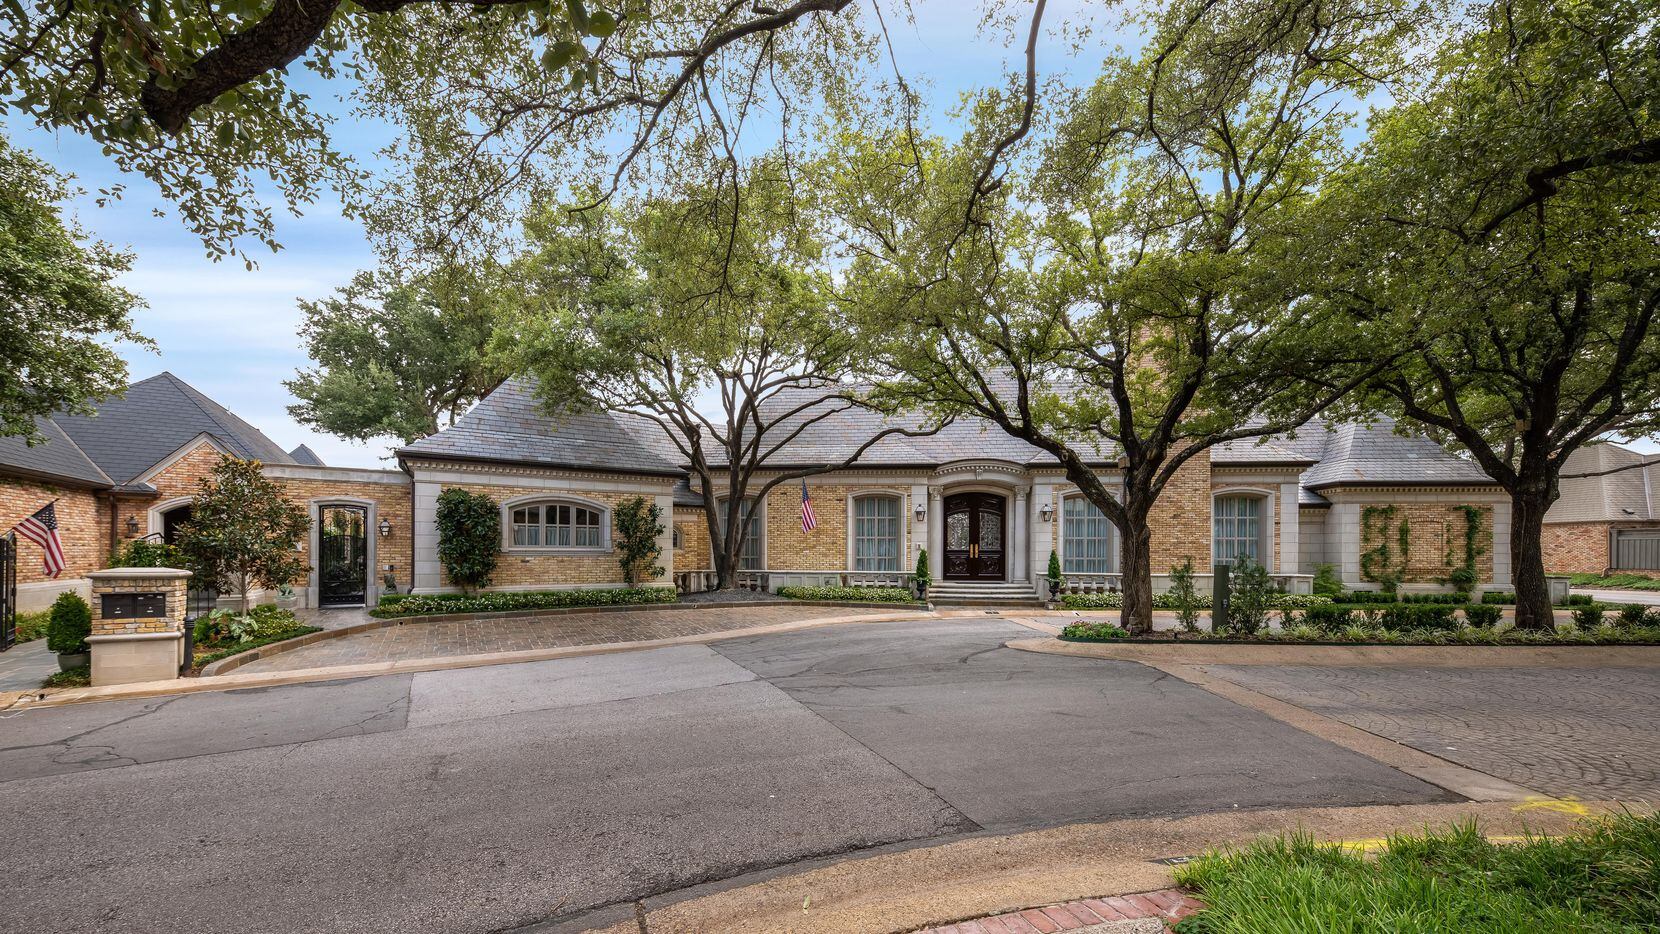 Take a look at the home at 1 Lakeside Park in Dallas.